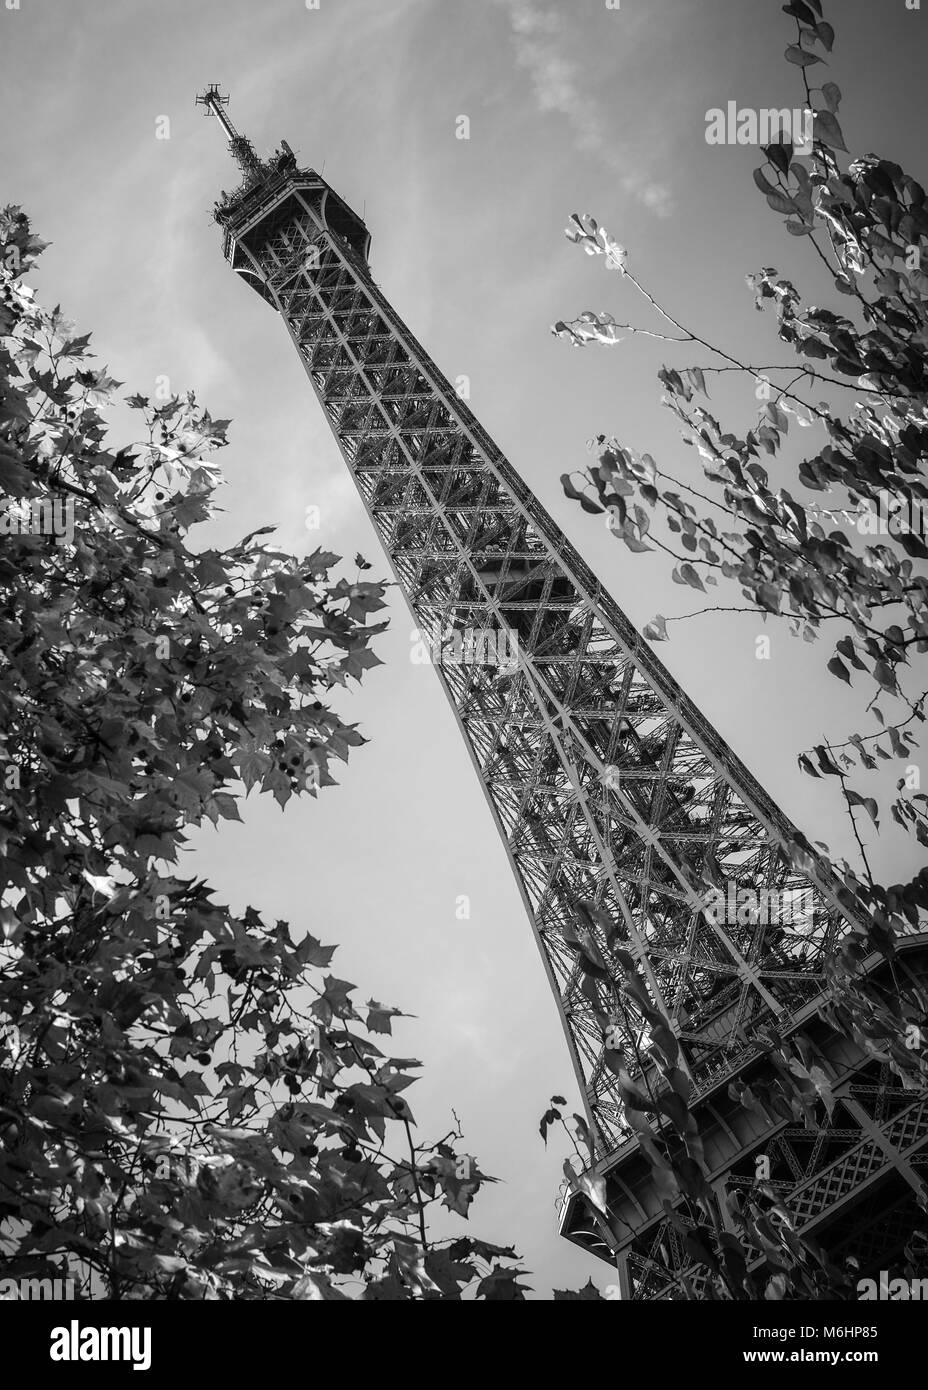 Black and White image of The Eiffel Tower, Paris, France Stock Photo